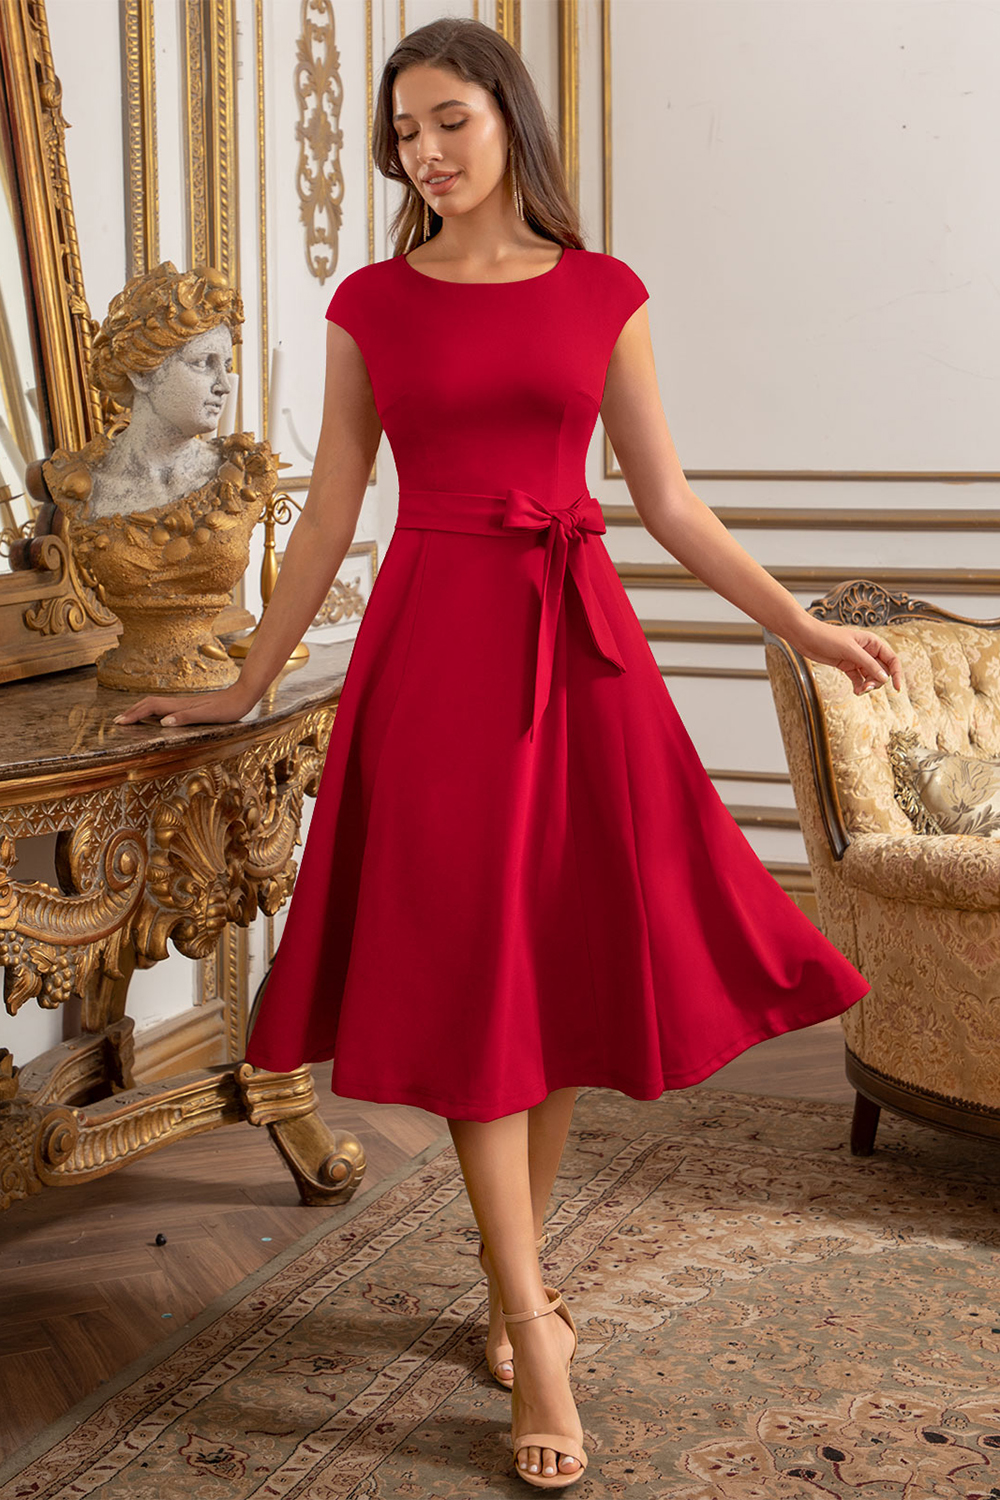 A-Line Knee-Length Red Cocktail Dress with Cap Sleeves, Vintage Style, Unique and Elegant